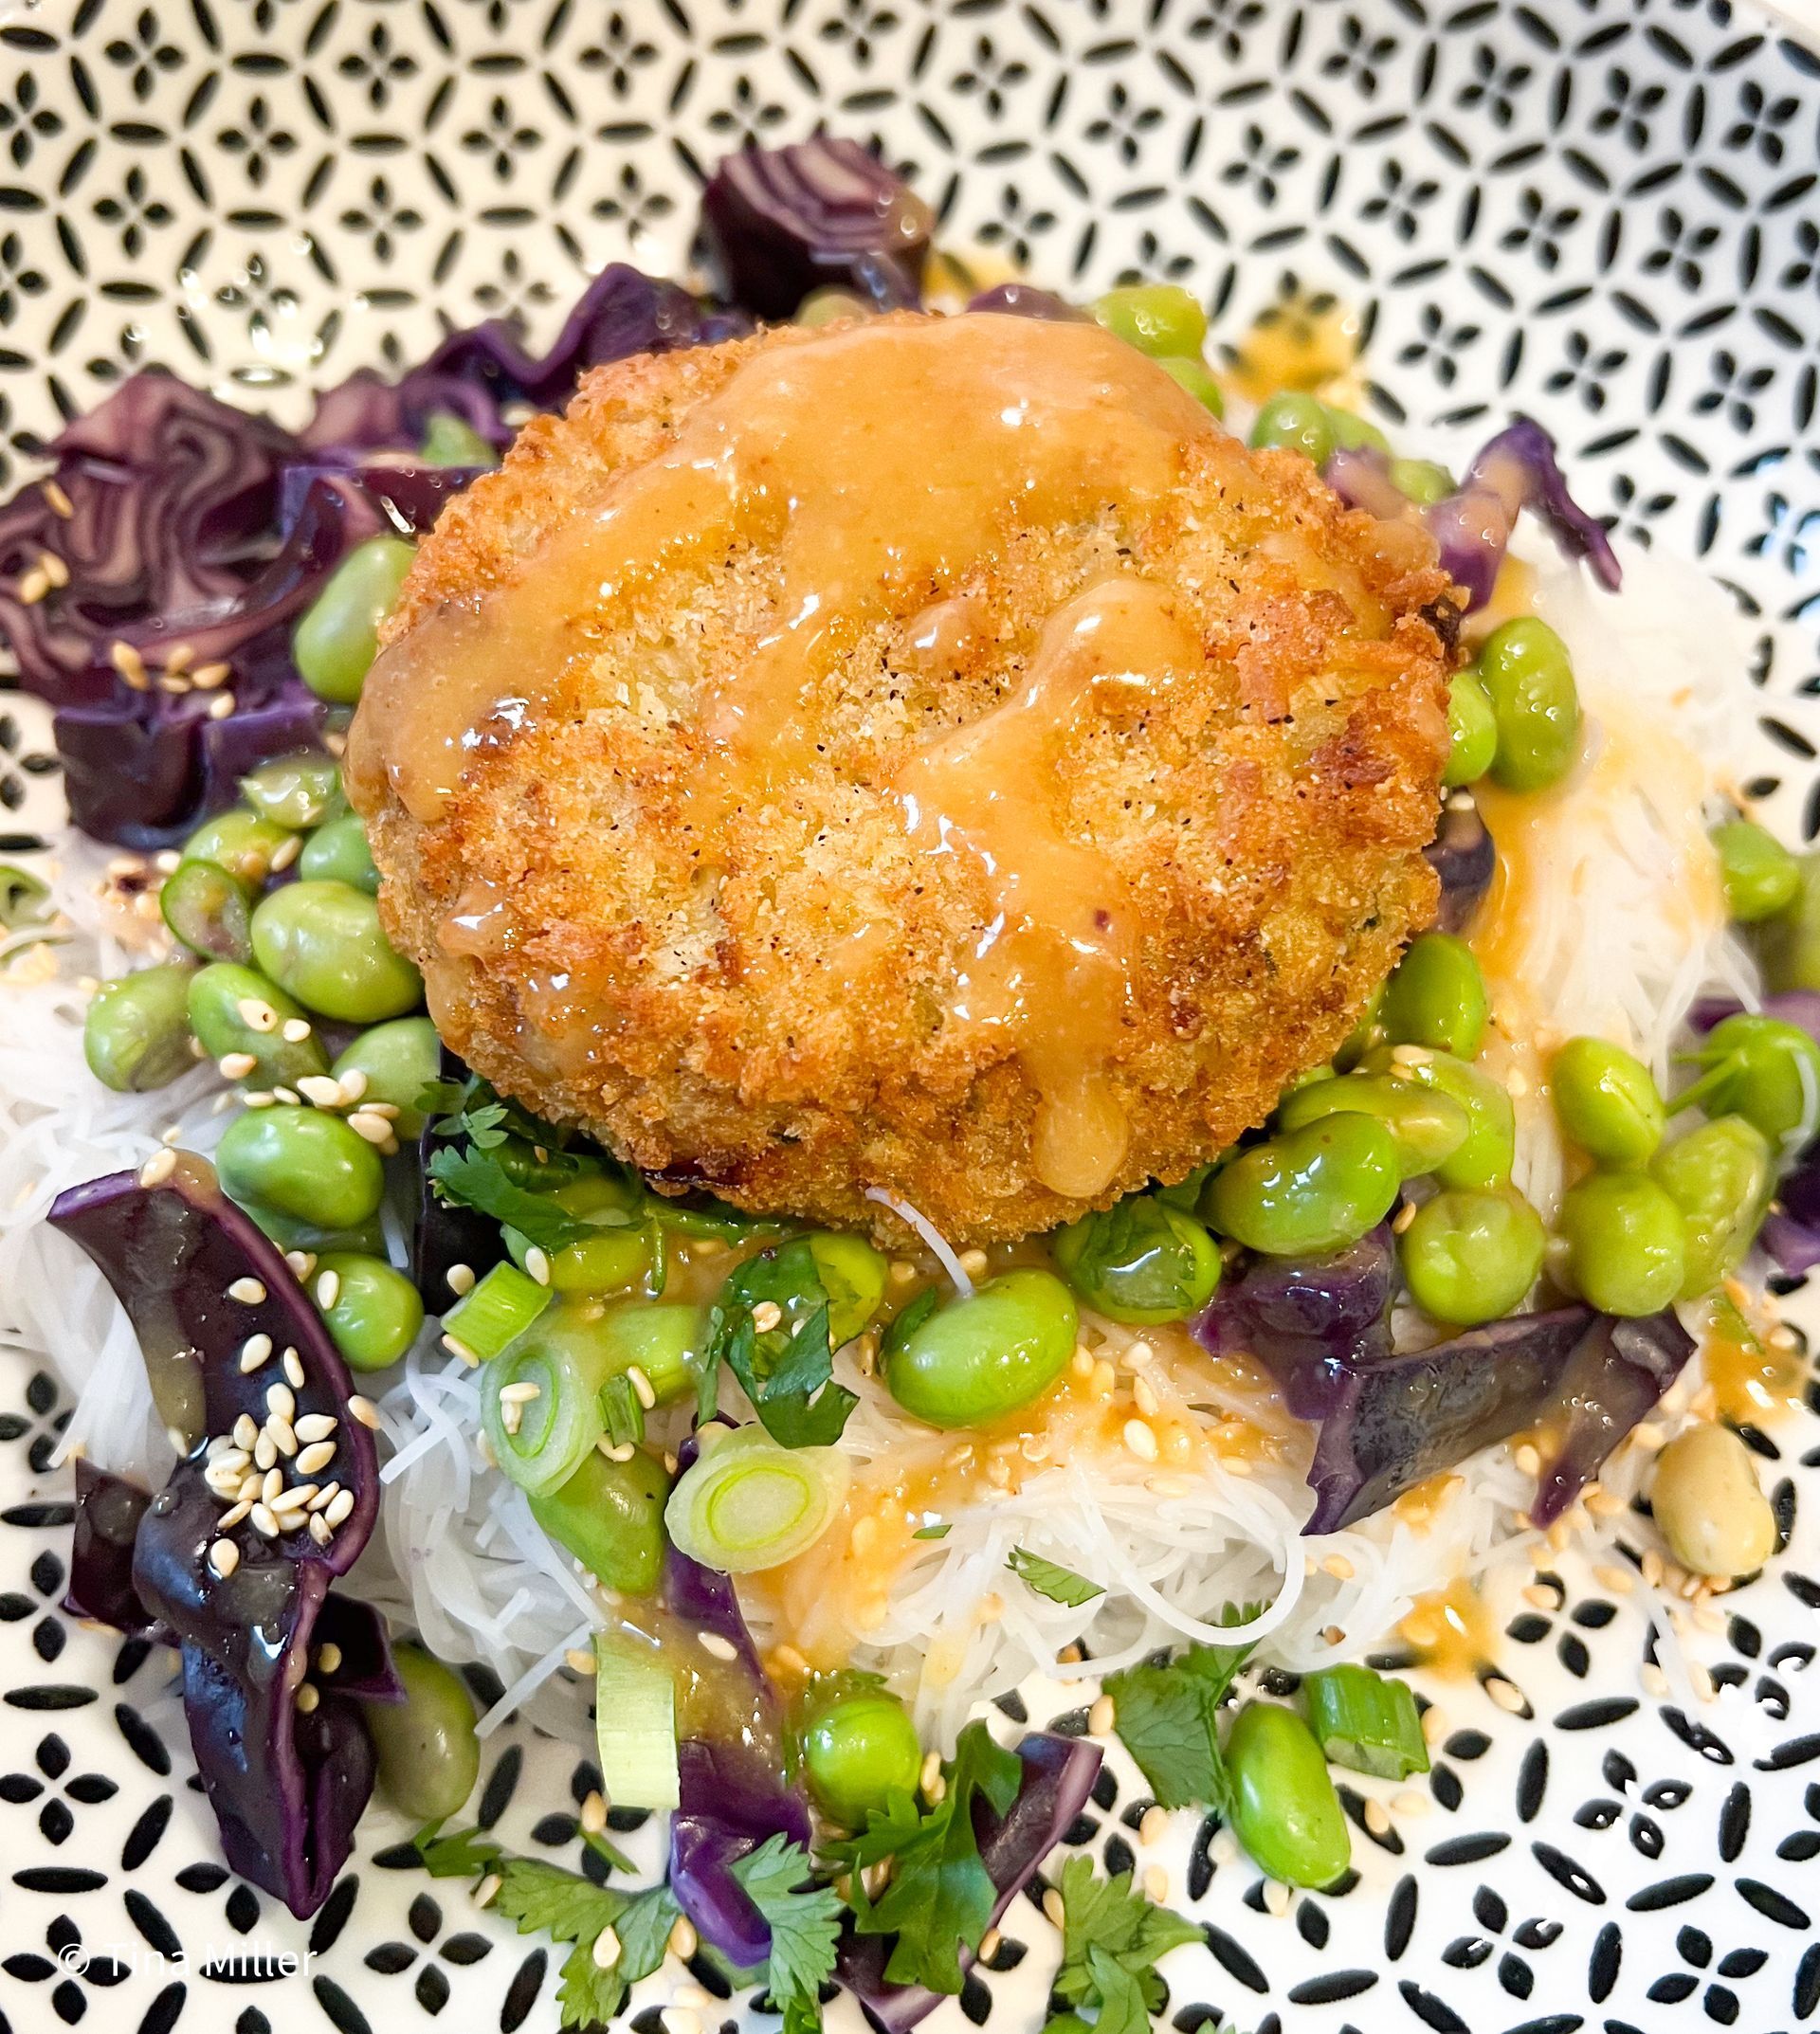 Breaded crab cake on top of red cabbage and edamame slaw with miso dressing served in a black and white bowl.